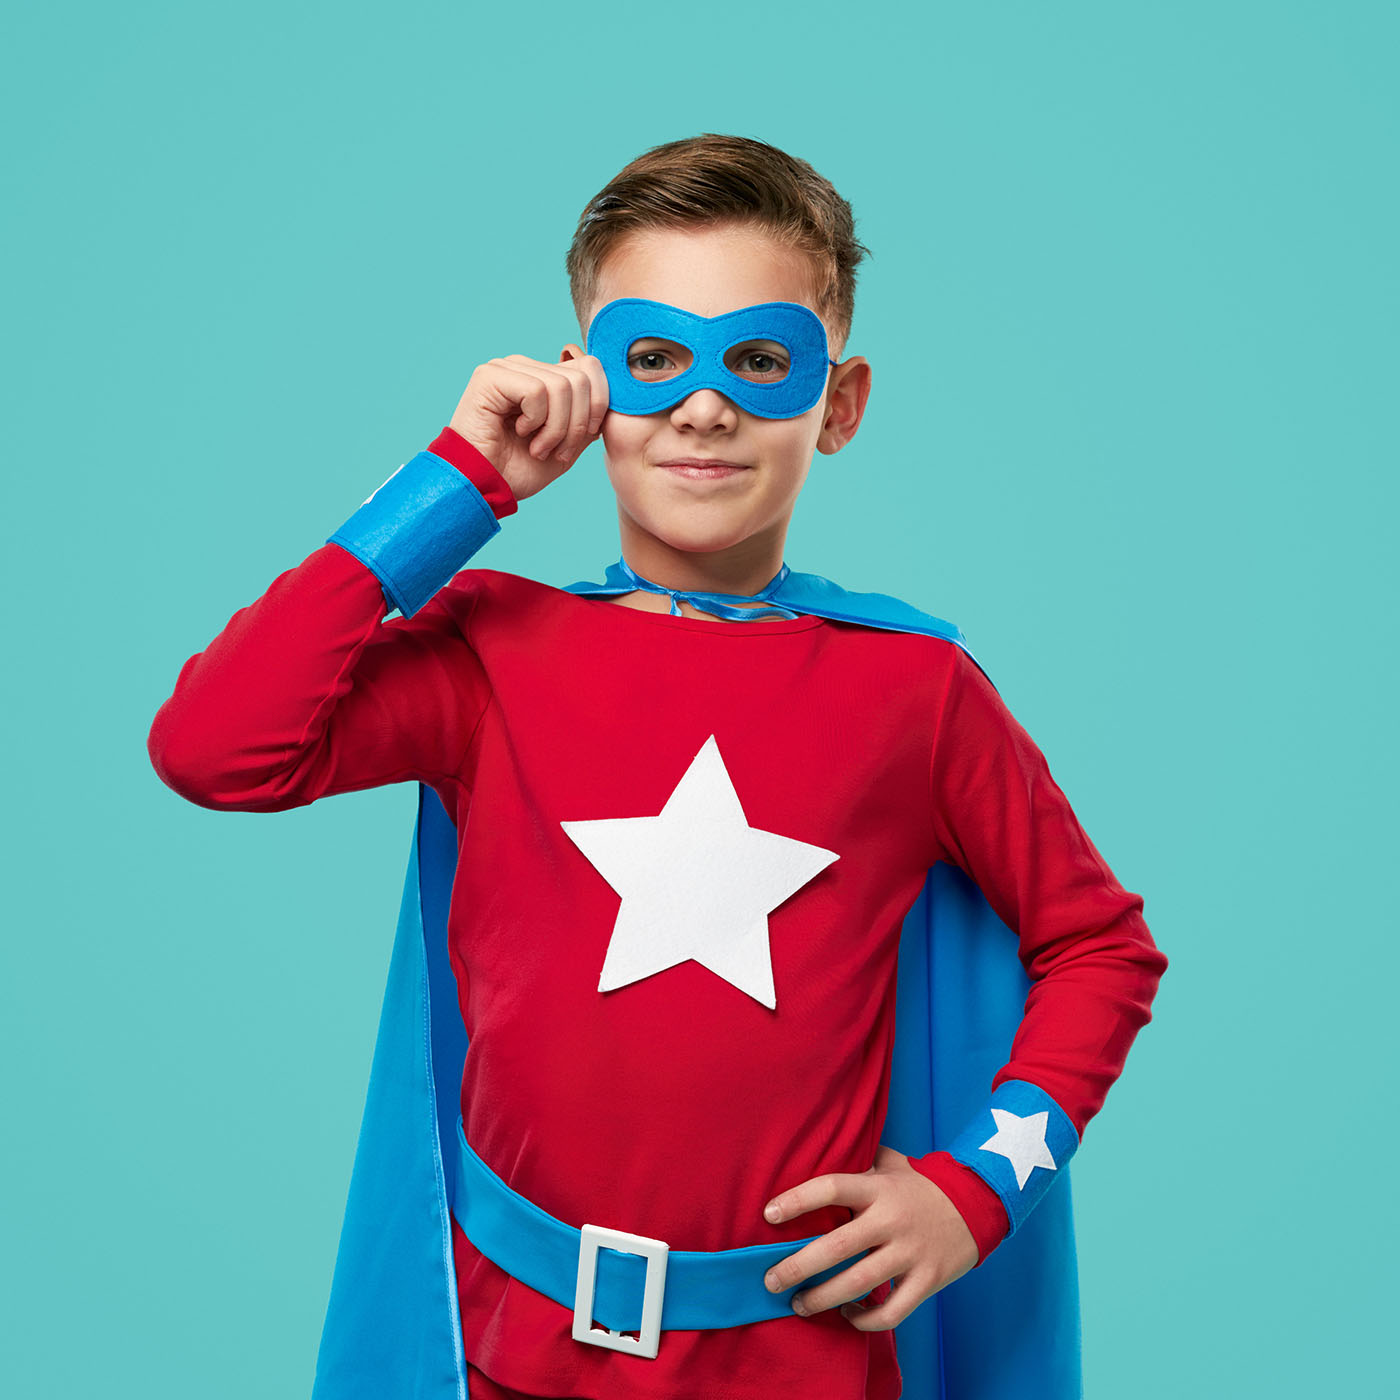 Smiling child wearing bright superhero cape and mask standing with hand on waist and looking at camera on blue background